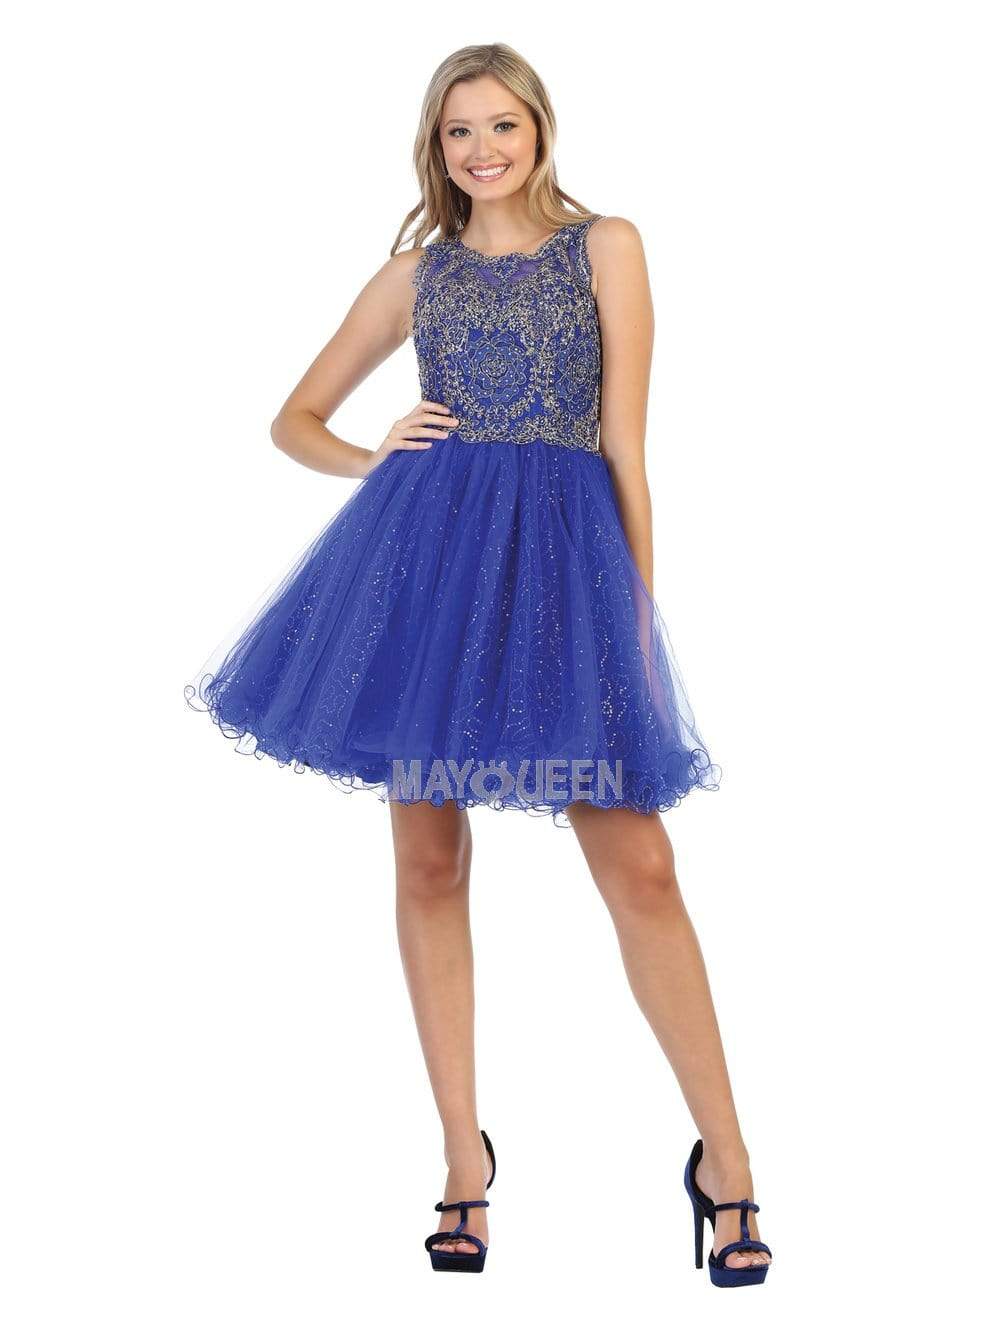 May Queen - MQ1726 Rosette Appliqued Glitter Tulle Dress Cocktail Dresses 4 / Royal